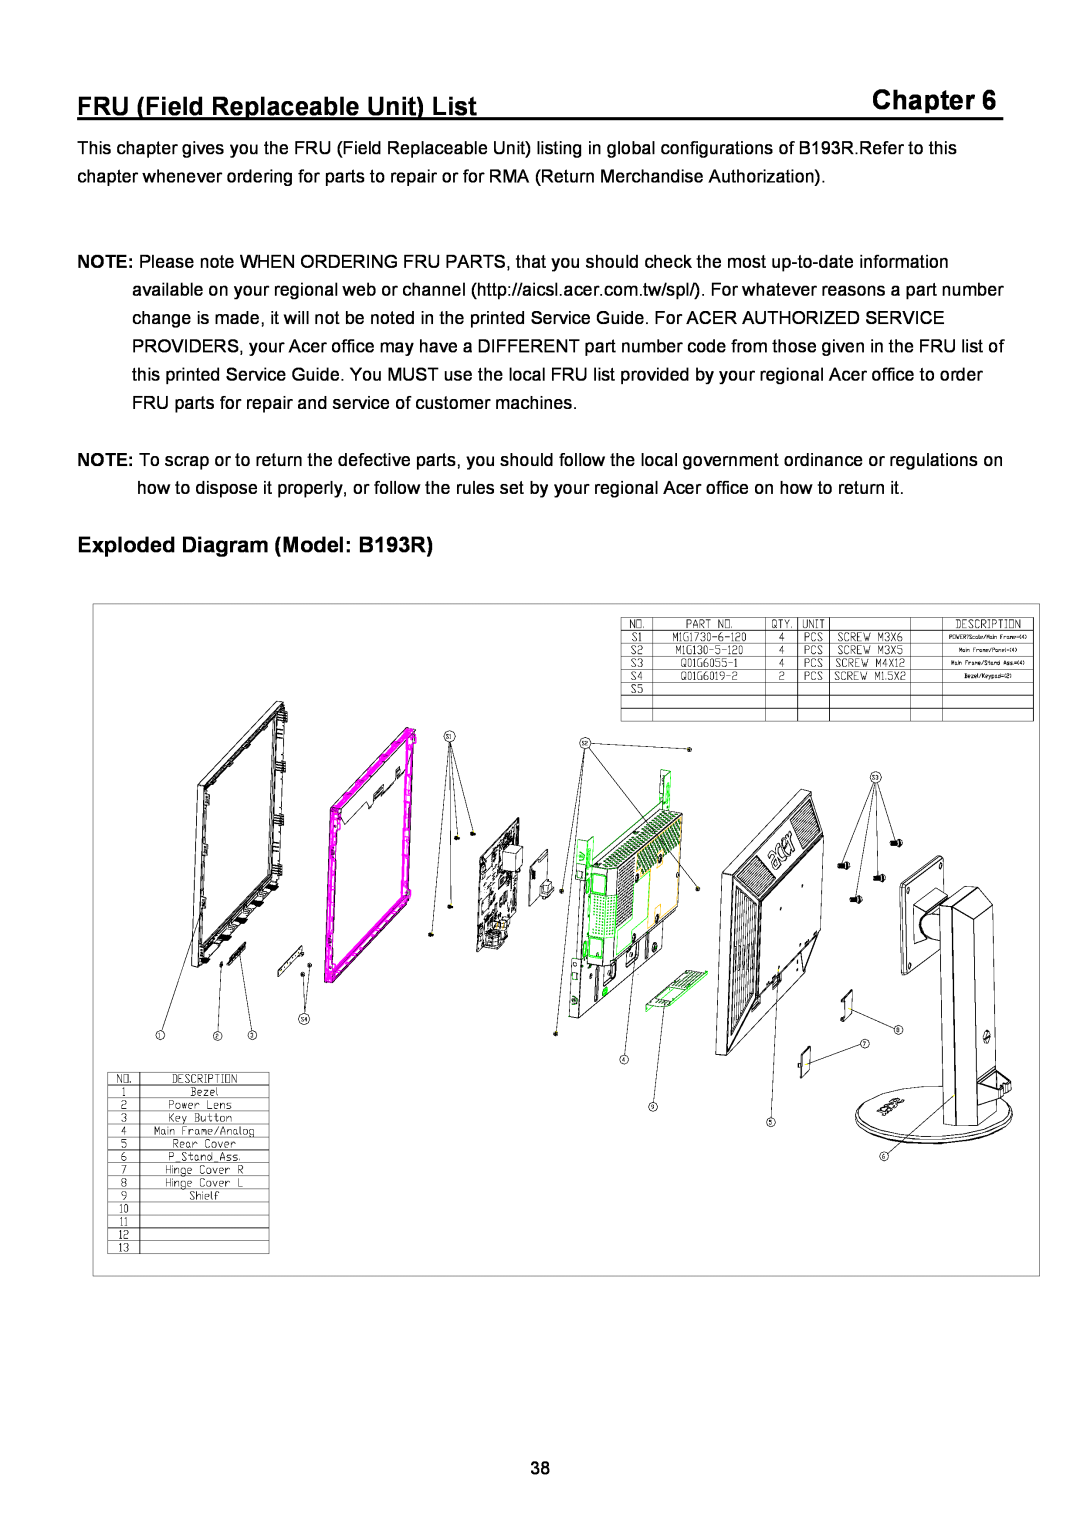 Acer manual Chapter, FRU Field Replaceable Unit List, Exploded Diagram Model B193R 